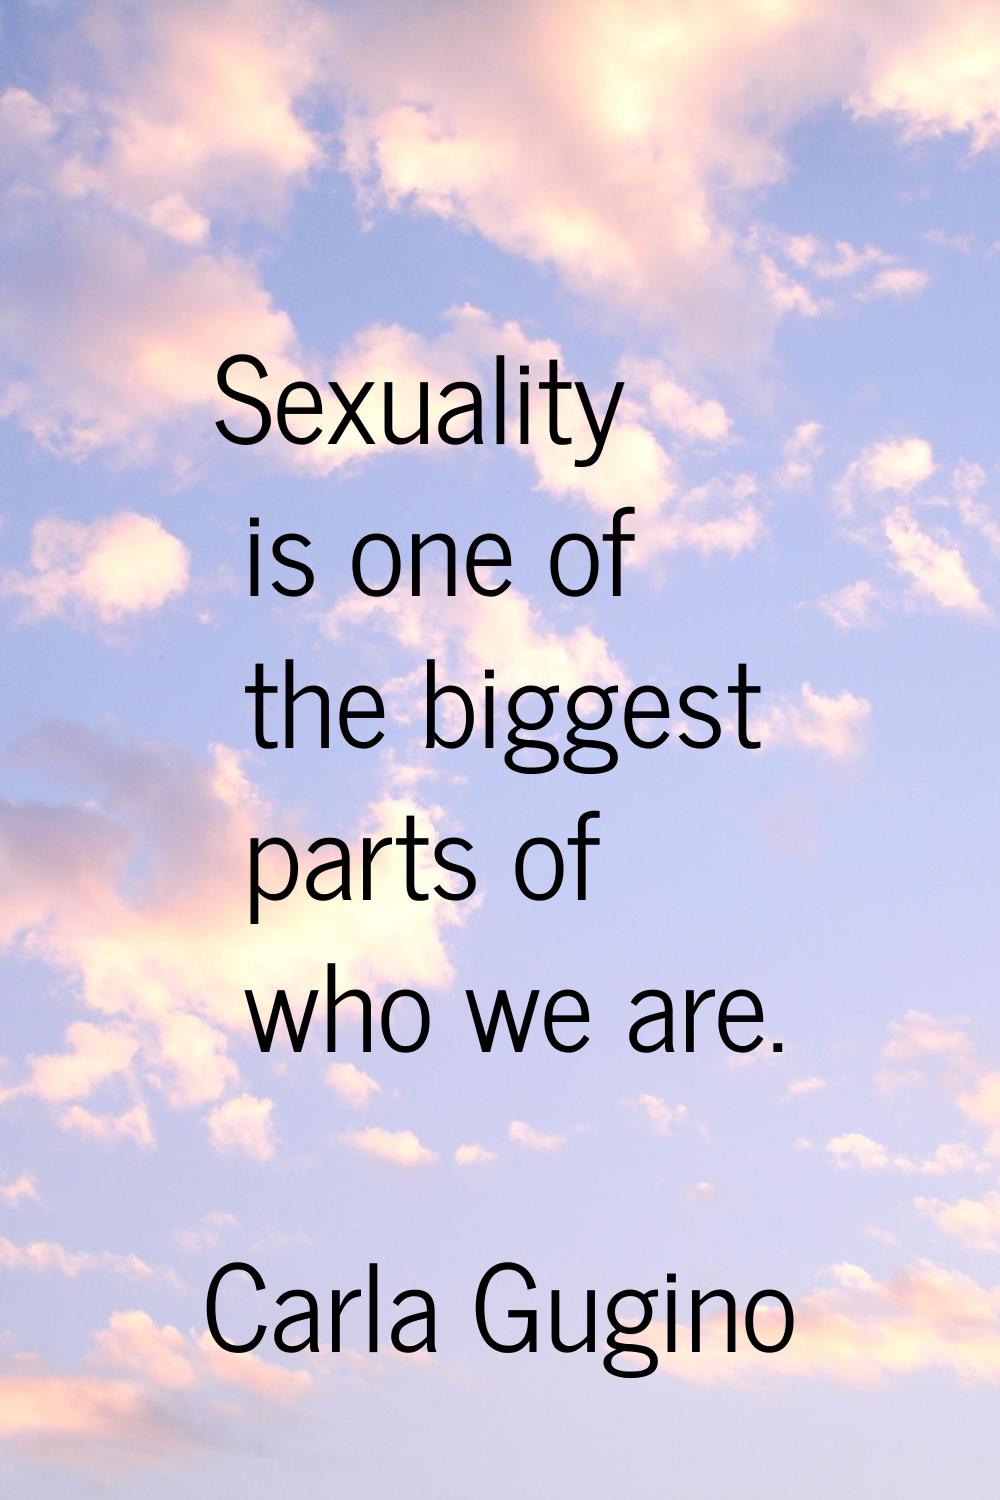 Sexuality is one of the biggest parts of who we are.